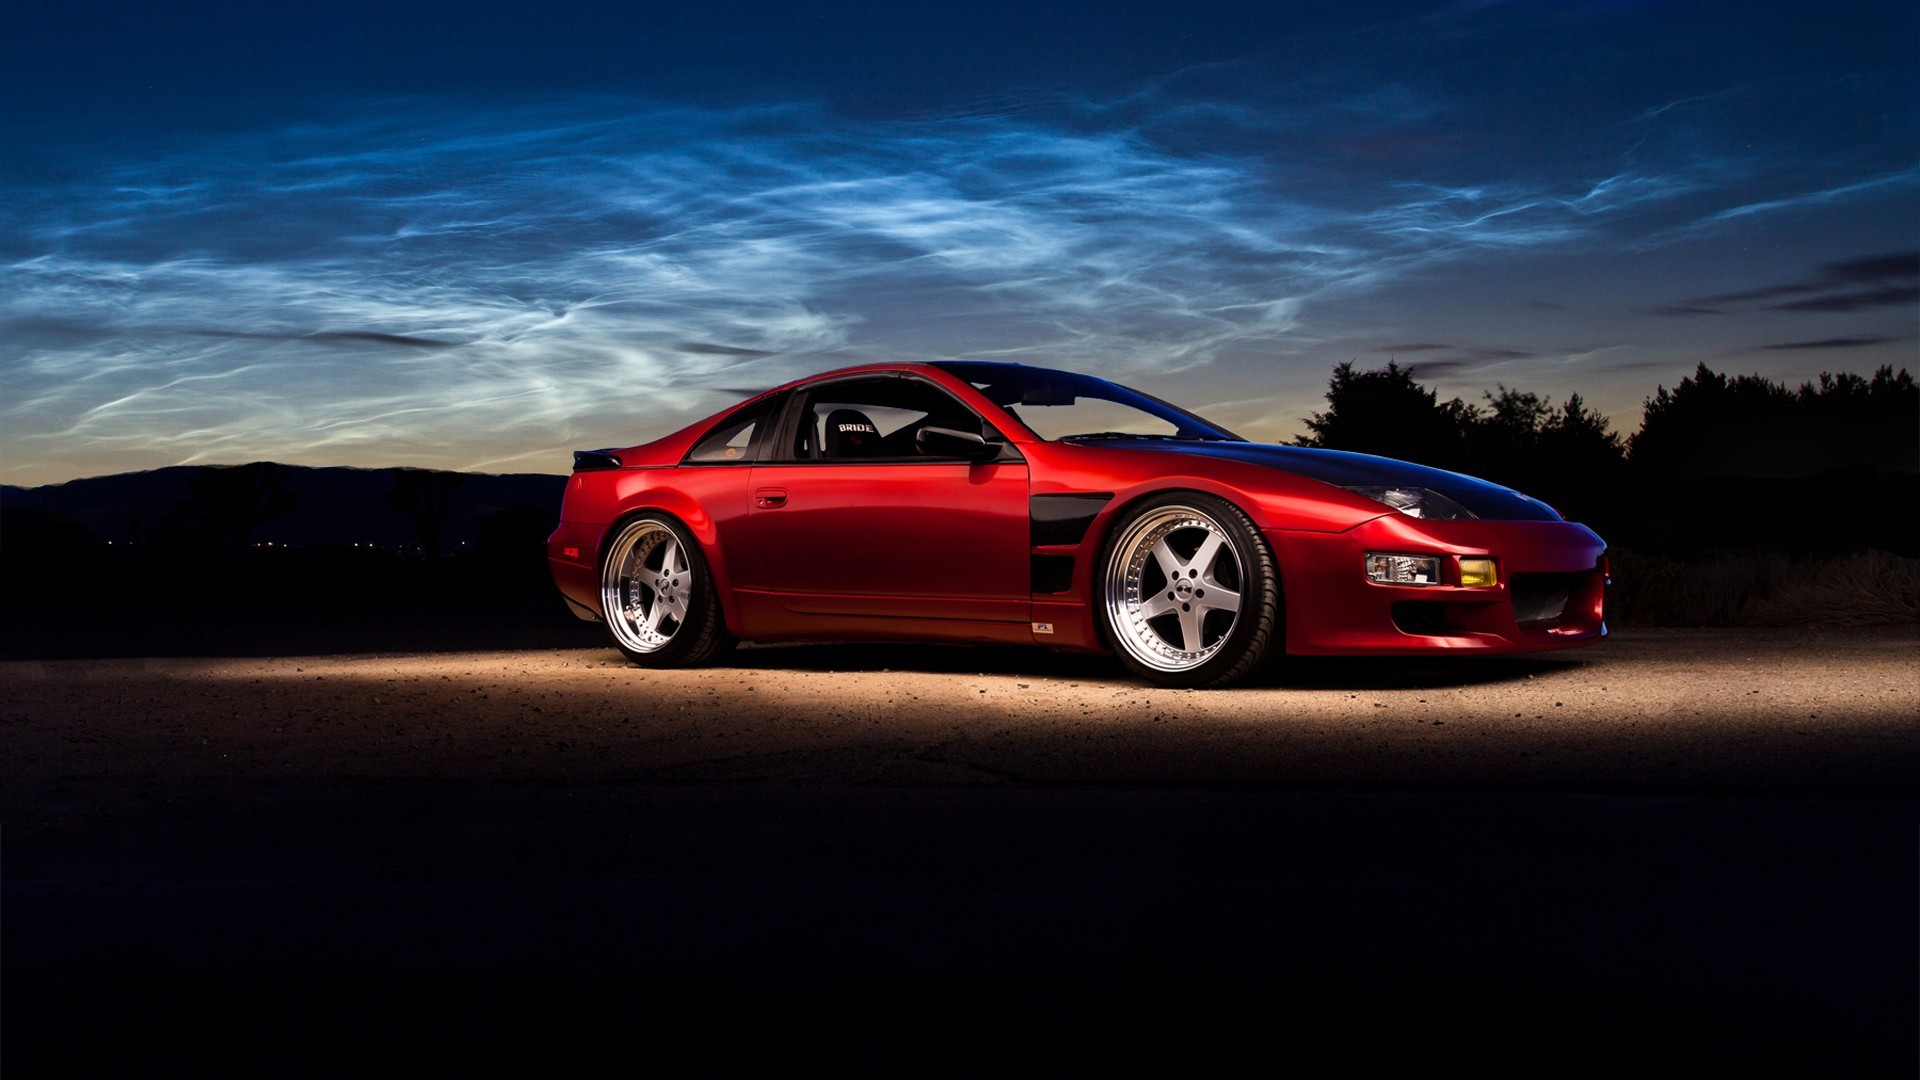 General 1920x1080 car Nissan 300ZX red red cars night Nissan Fairlady Z Nissan vehicle Japanese cars